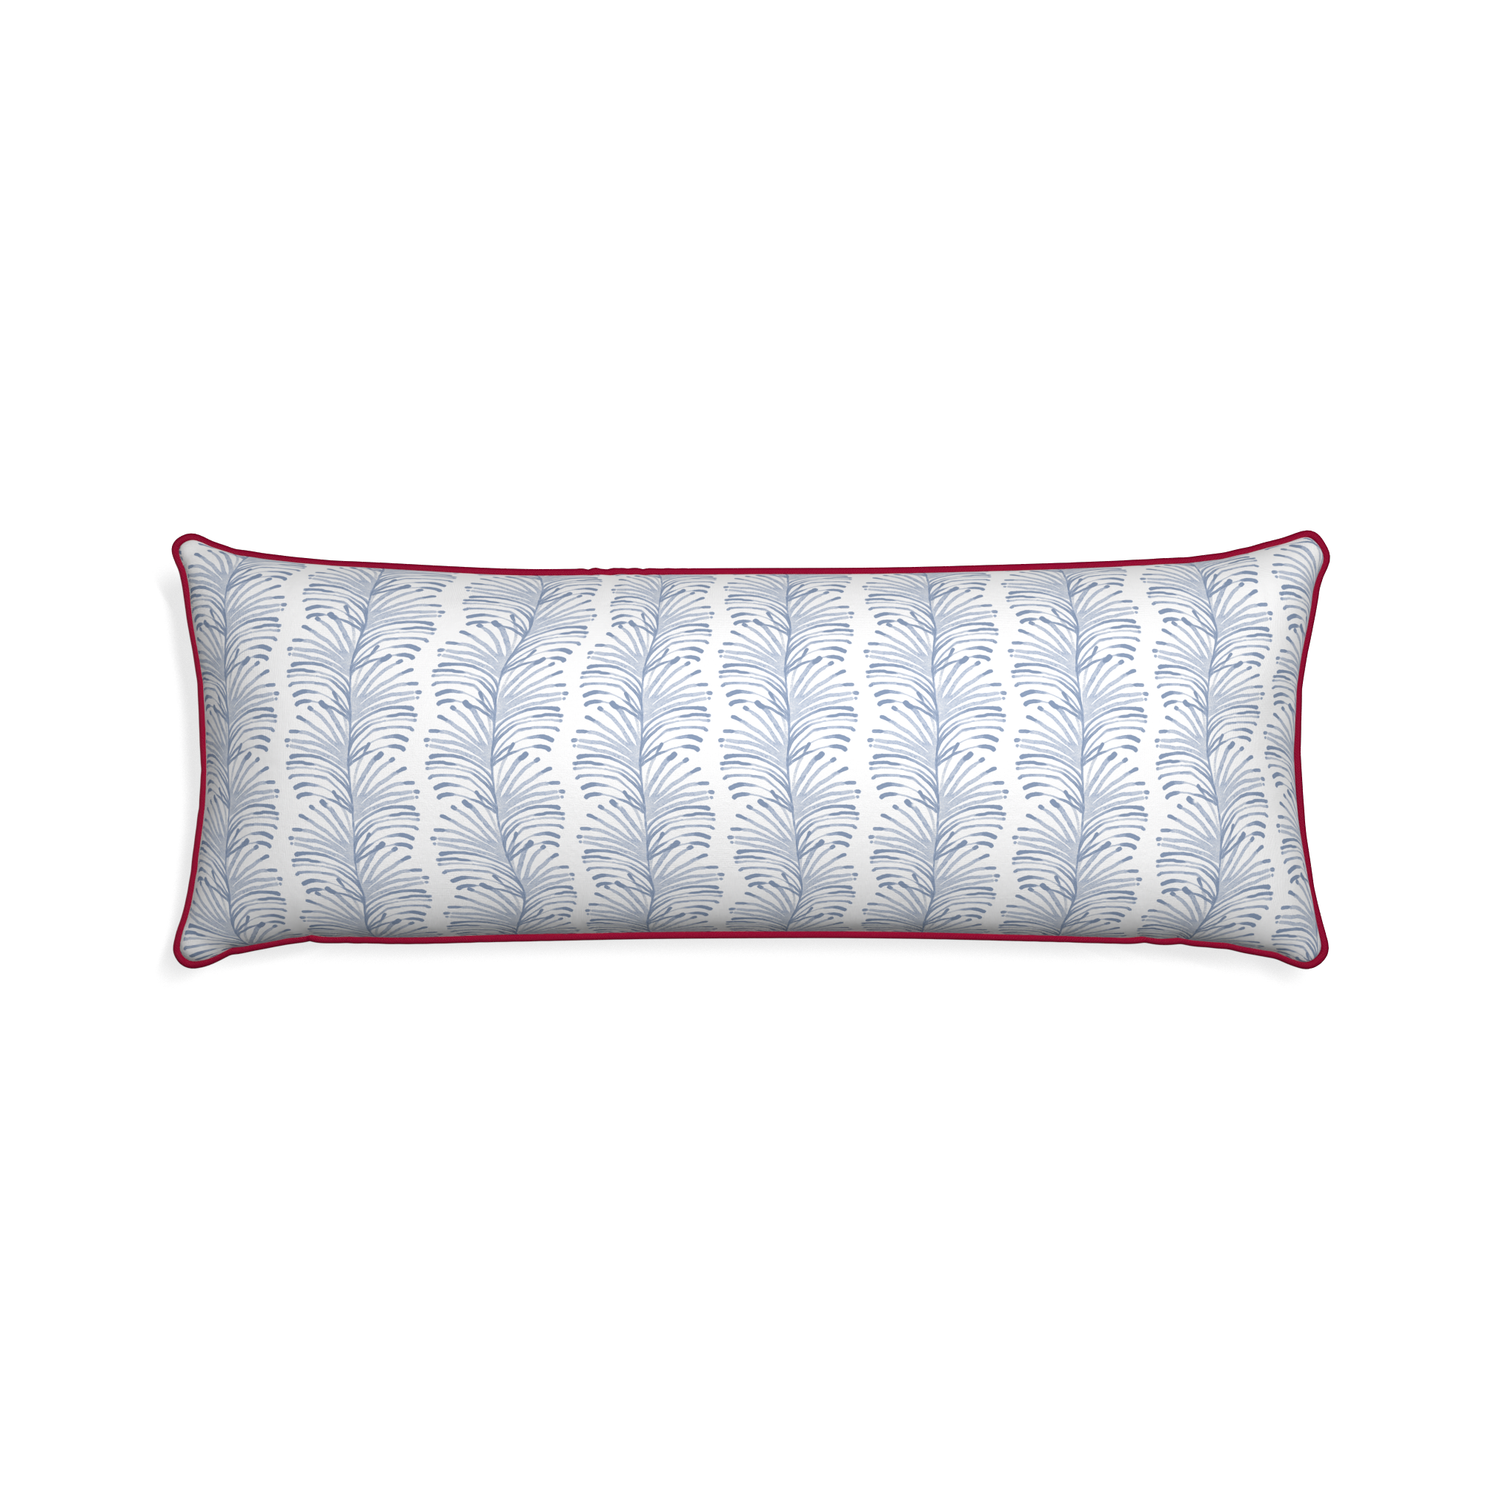 Xl-lumbar emma sky custom pillow with raspberry piping on white background